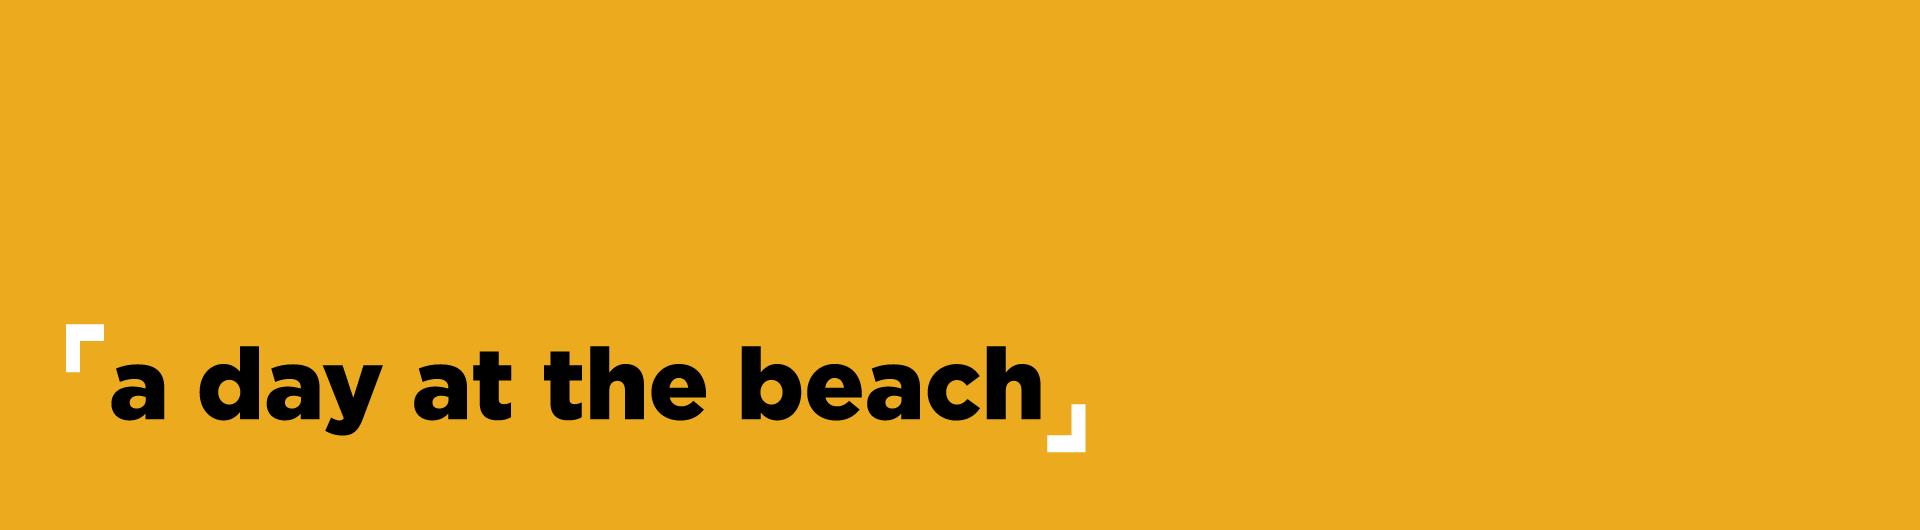 day at the beach placeholder banner